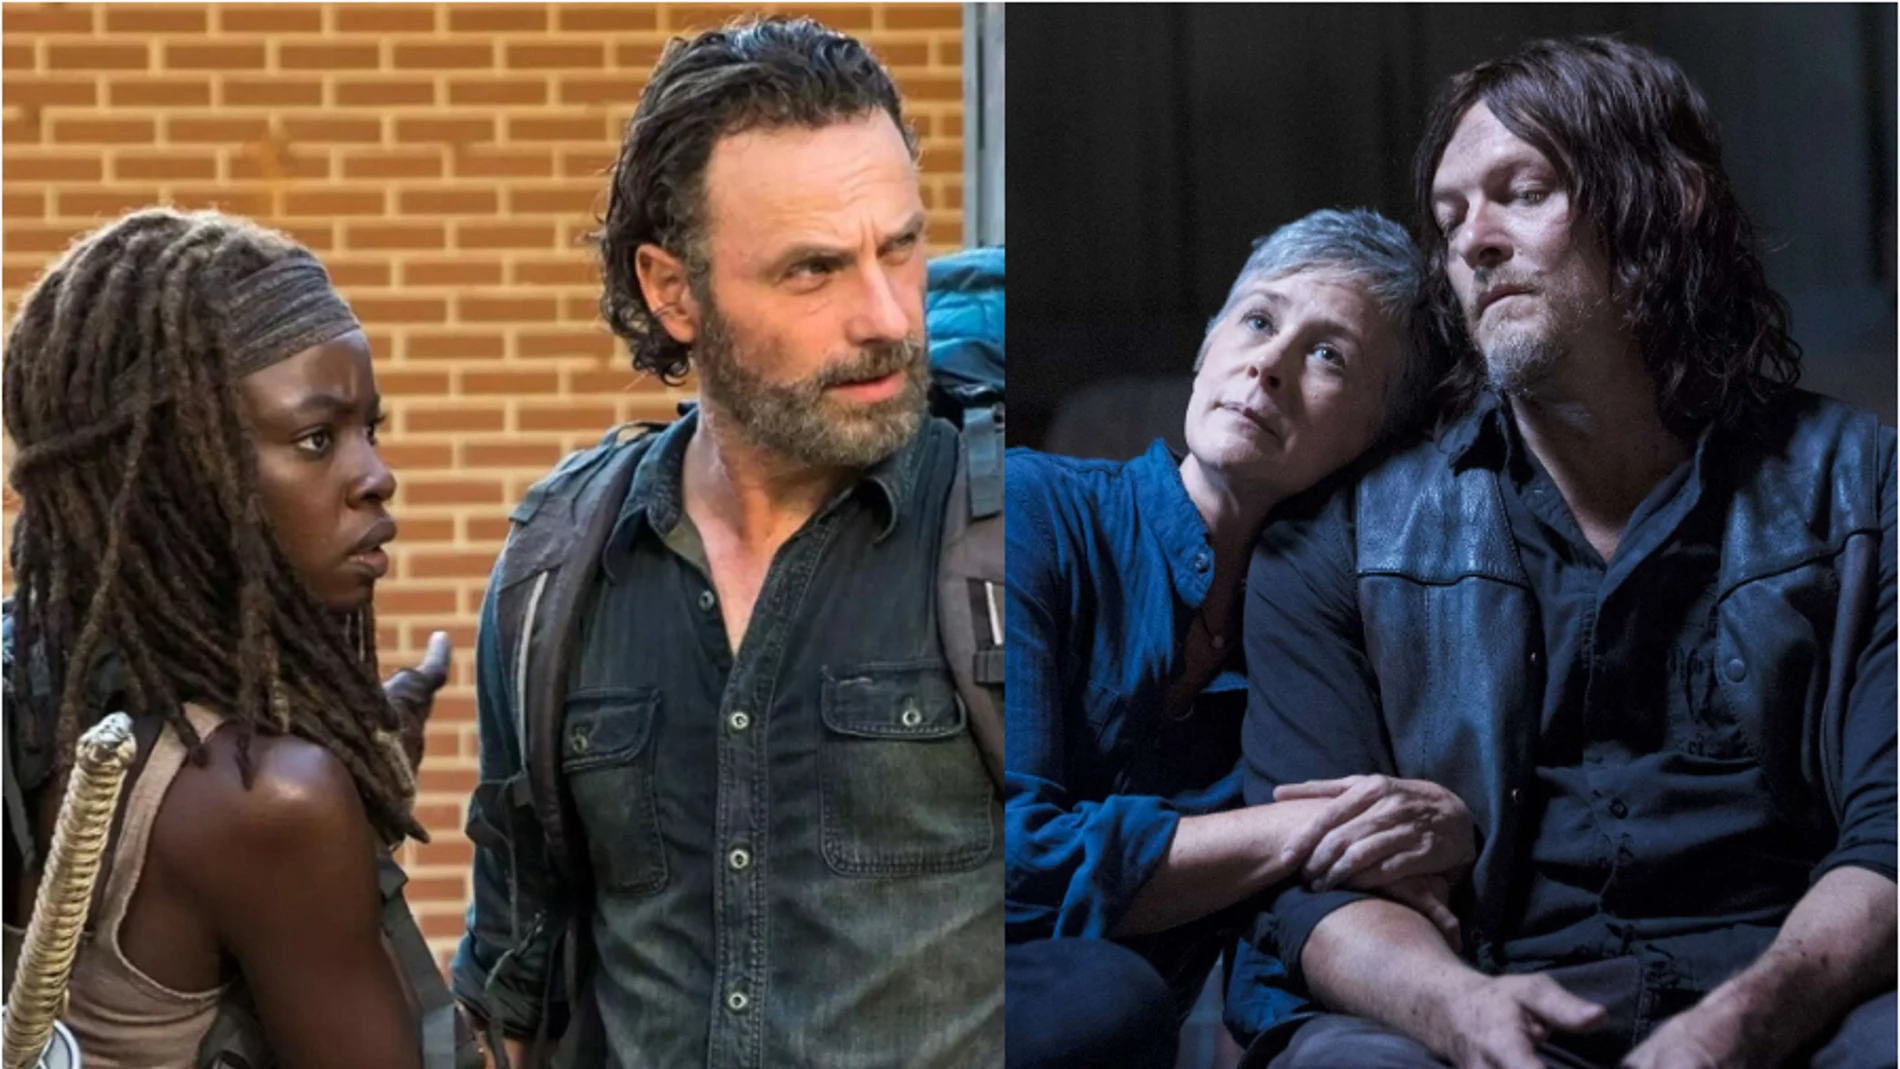 ‘The Walking Dead’ spins off